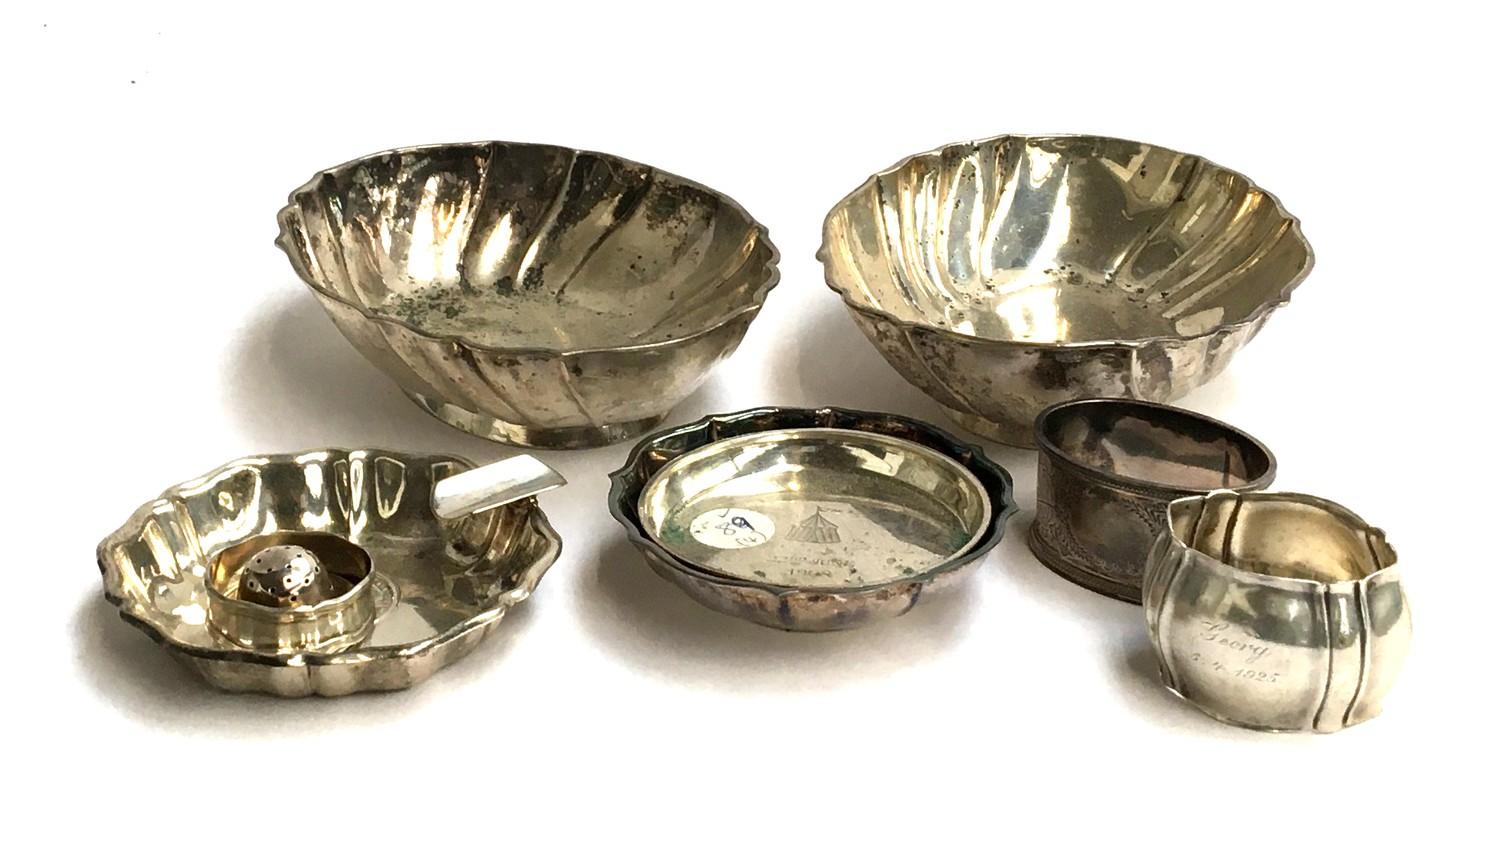 Several plated dishes and ashtrays, together with a Continental silver napkin ring - Image 2 of 2